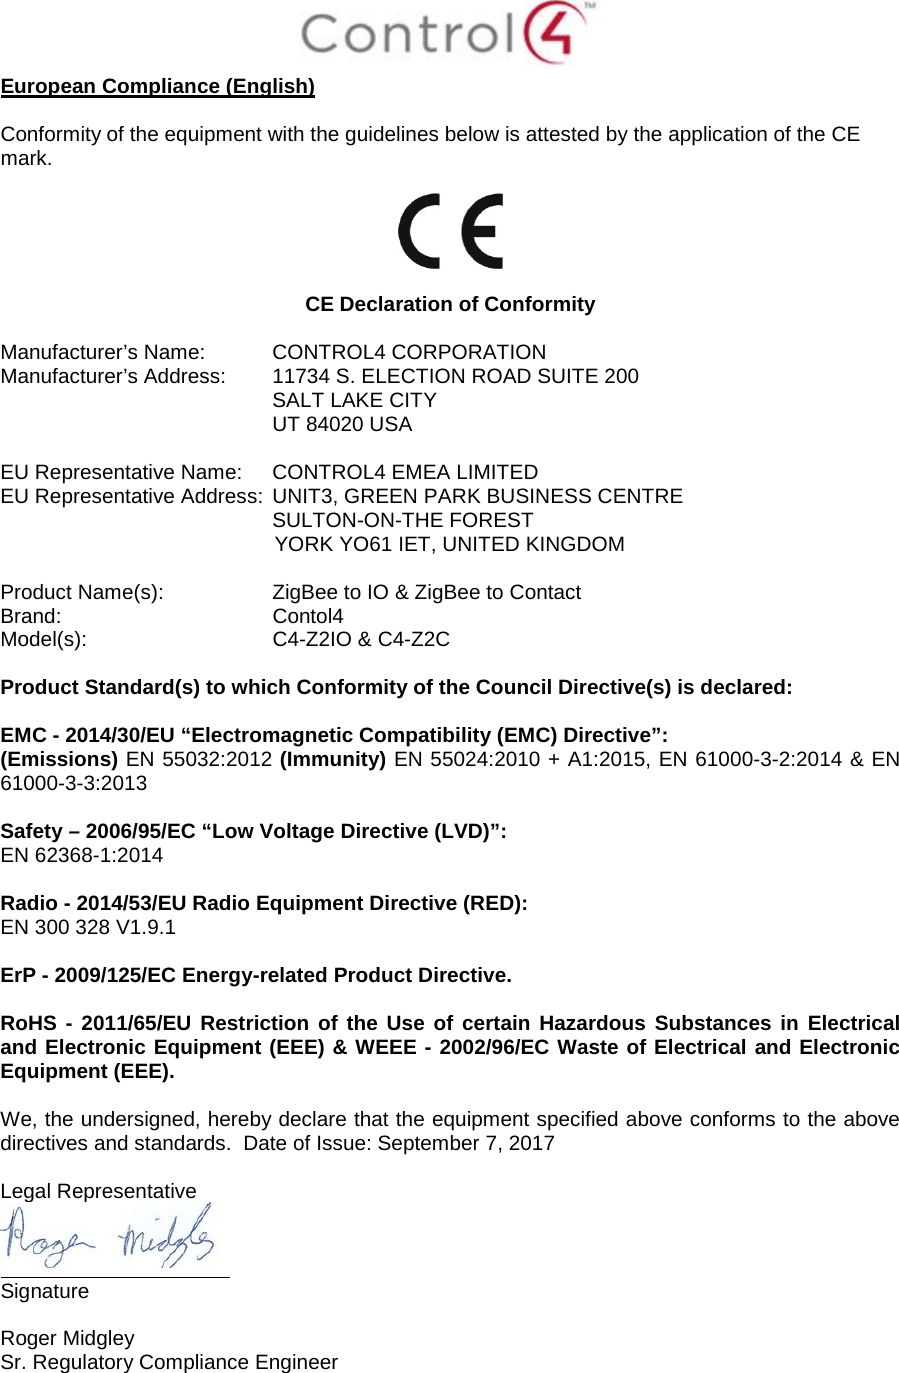  European Compliance (English)  Conformity of the equipment with the guidelines below is attested by the application of the CE mark.    CE Declaration of Conformity  Manufacturer’s Name: CONTROL4 CORPORATION  Manufacturer’s Address:  11734 S. ELECTION ROAD SUITE 200  SALT LAKE CITY  UT 84020 USA                          EU Representative Name: CONTROL4 EMEA LIMITED EU Representative Address: UNIT3, GREEN PARK BUSINESS CENTRE SULTON-ON-THE FOREST YORK YO61 IET, UNITED KINGDOM       Product Name(s):  ZigBee to IO &amp; ZigBee to Contact Brand: Contol4     Model(s): C4-Z2IO &amp; C4-Z2C  Product Standard(s) to which Conformity of the Council Directive(s) is declared:  EMC - 2014/30/EU “Electromagnetic Compatibility (EMC) Directive”: (Emissions) EN 55032:2012 (Immunity) EN 55024:2010 + A1:2015, EN 61000-3-2:2014 &amp; EN 61000-3-3:2013  Safety – 2006/95/EC “Low Voltage Directive (LVD)”: EN 62368-1:2014   Radio - 2014/53/EU Radio Equipment Directive (RED): EN 300 328 V1.9.1  ErP - 2009/125/EC Energy-related Product Directive.  RoHS - 2011/65/EU Restriction of the Use of certain Hazardous Substances in Electrical and Electronic Equipment (EEE) &amp; WEEE - 2002/96/EC Waste of Electrical and Electronic Equipment (EEE).  We, the undersigned, hereby declare that the equipment specified above conforms to the above directives and standards.  Date of Issue: September 7, 2017  Legal Representative  Signature     Roger Midgley    Sr. Regulatory Compliance Engineer   